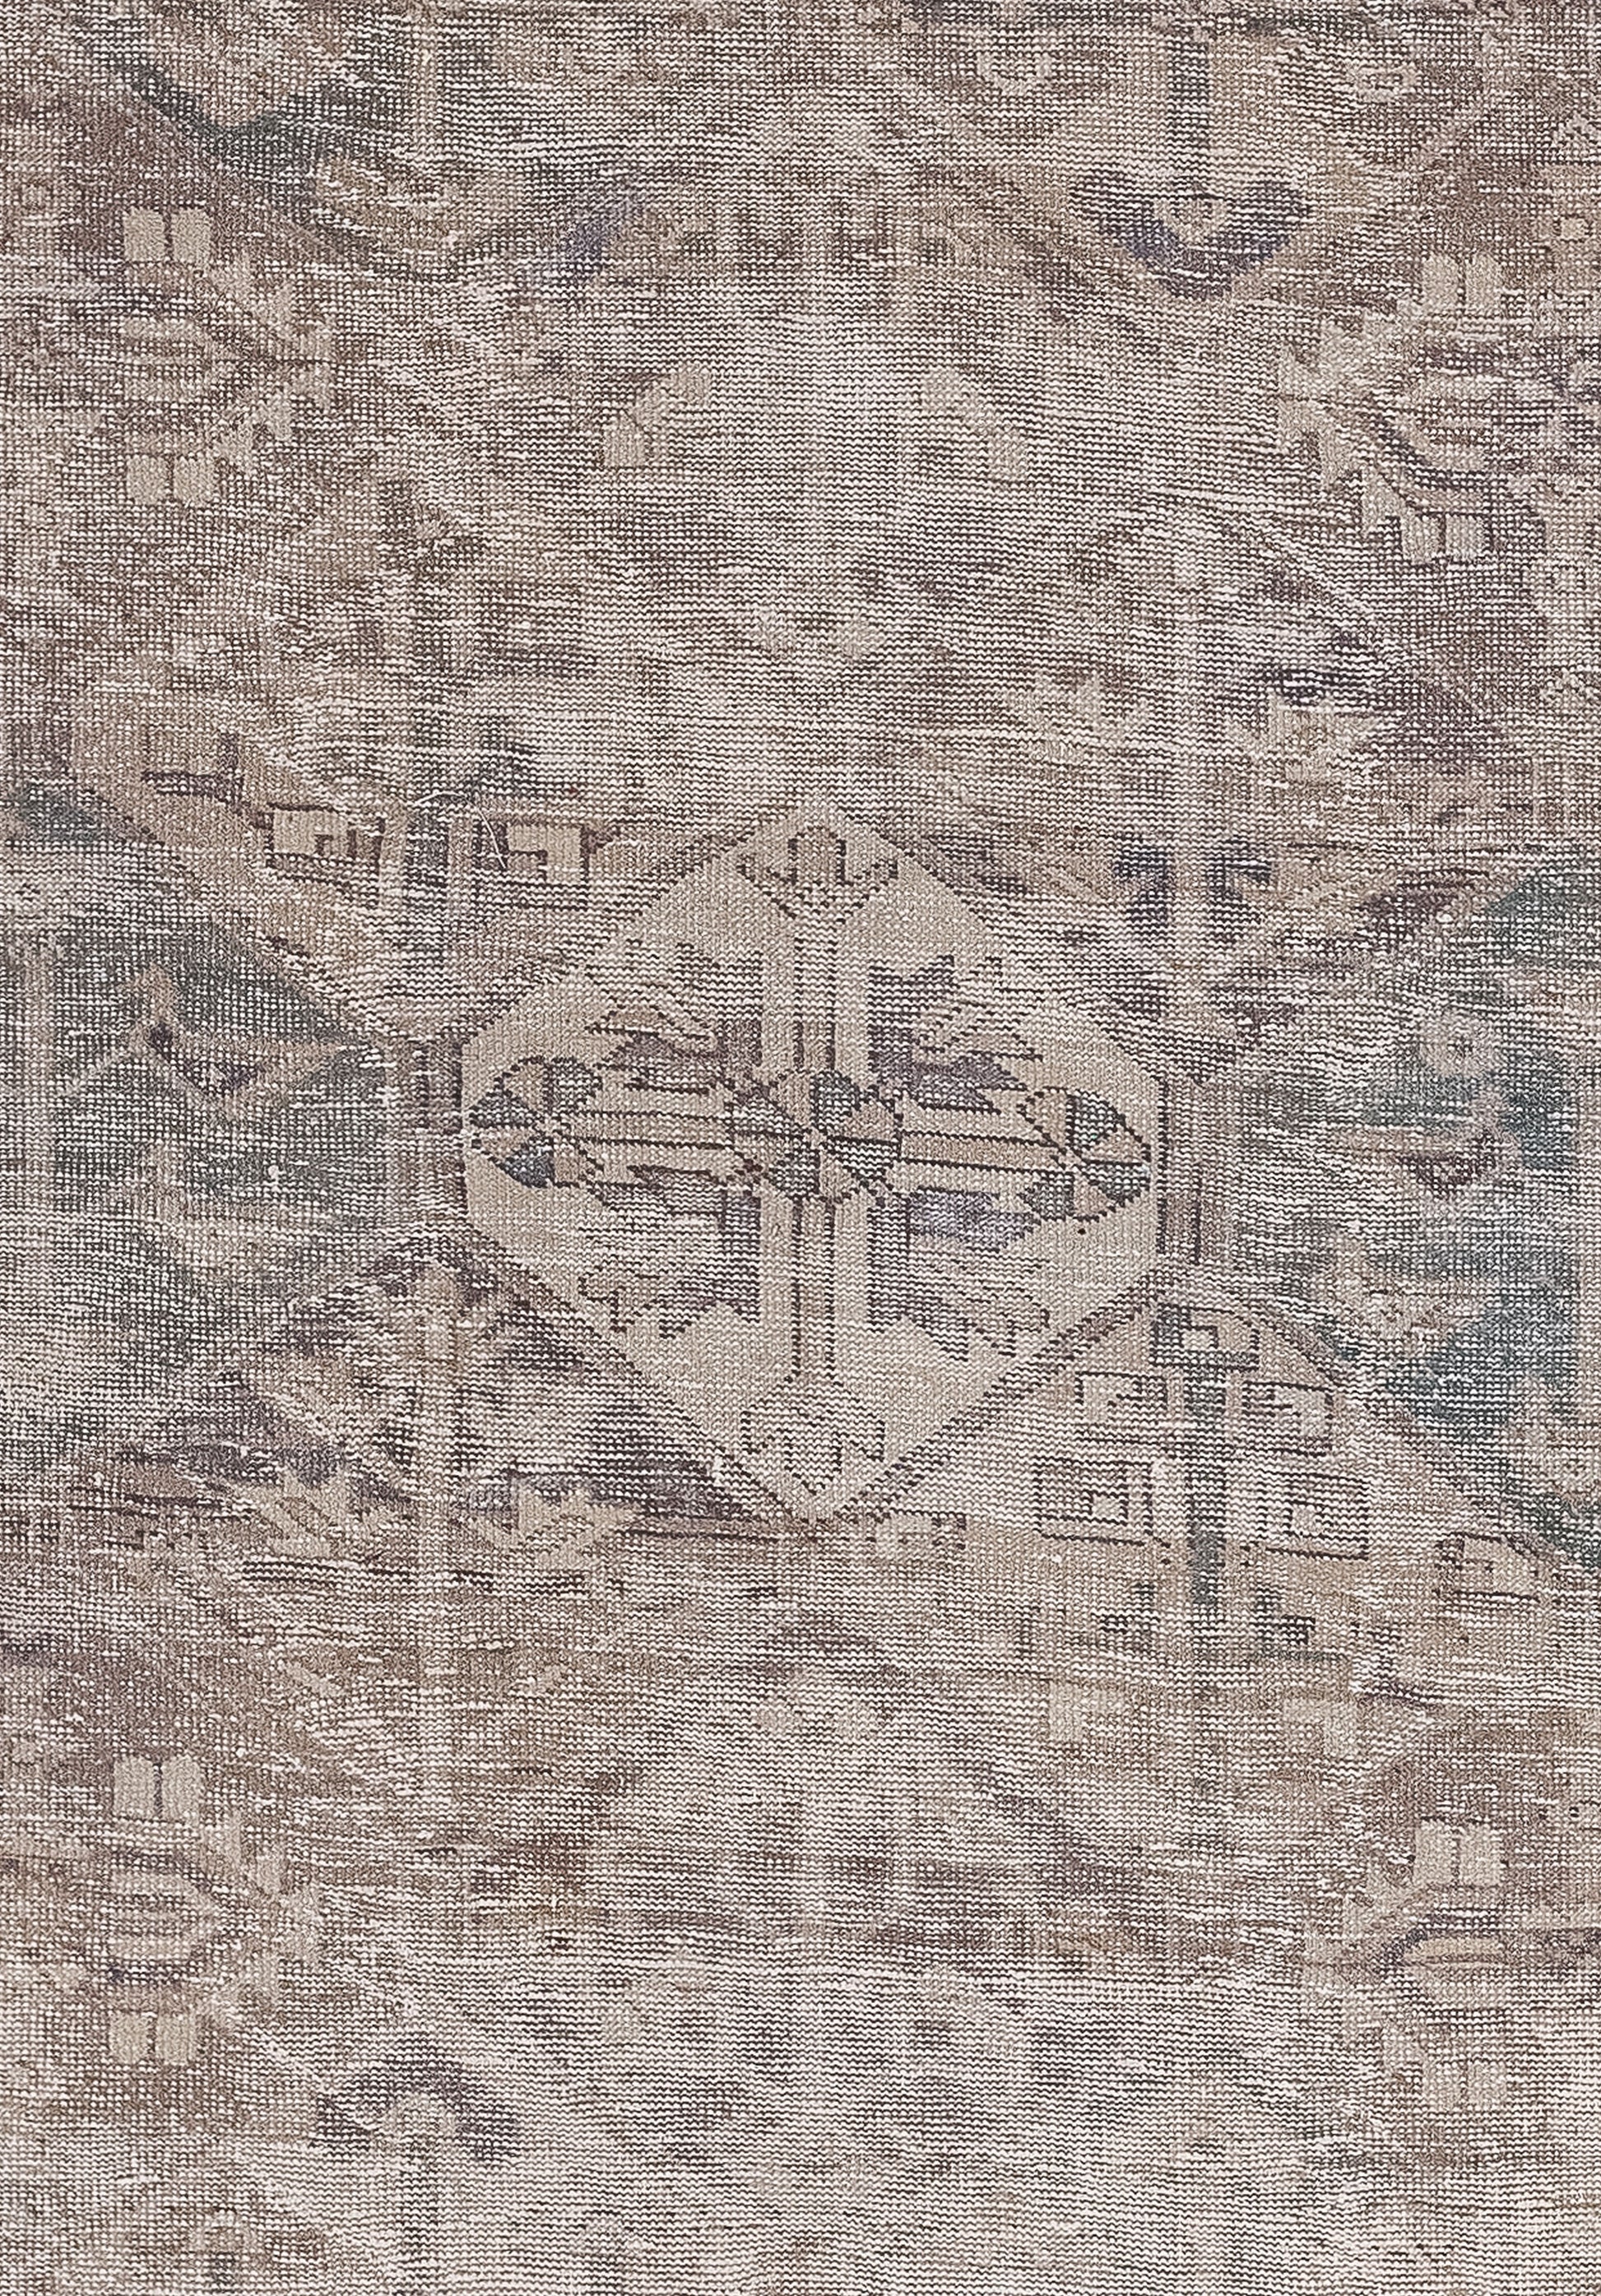 The entire inner content has rhombuses next to each other with alternate designs. The close-up of the carpet features a rhombus with a nested cross made up of arrows pointing to the center. 